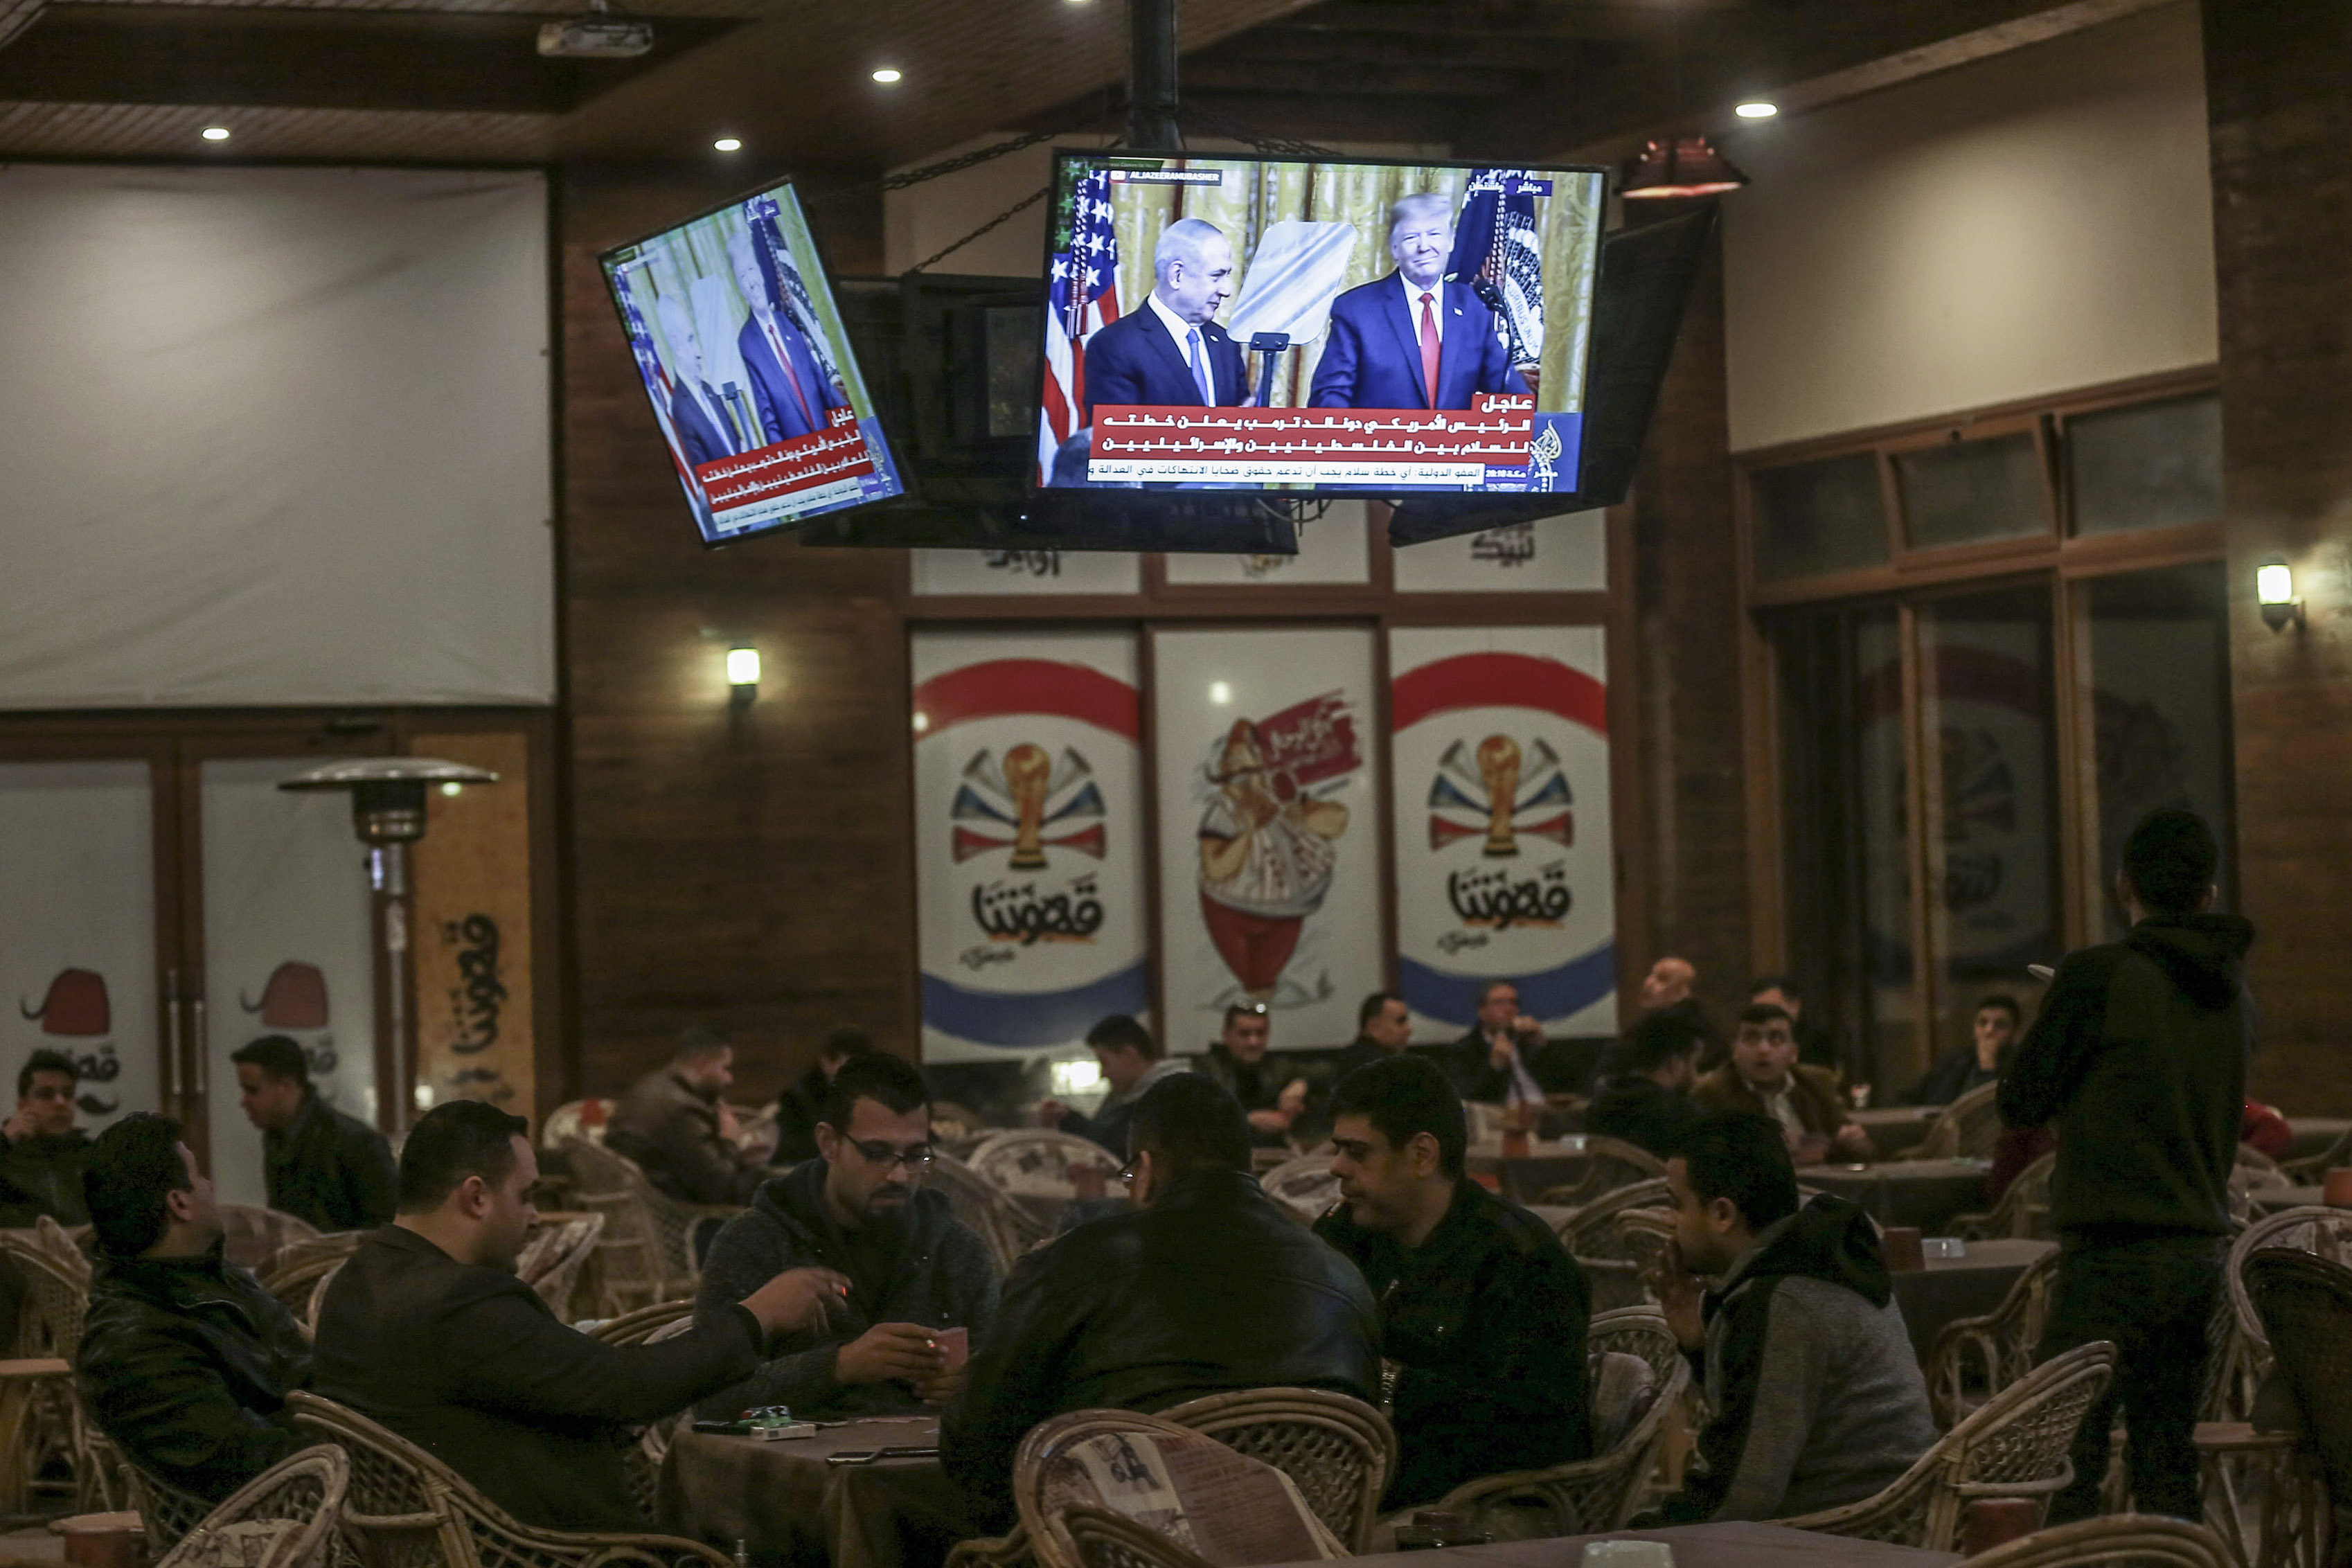 28 January 2020, Palestinian Territories, Gaza City: Palestinians watch a televised press conference of US President Donald Trump and Israeli Prime Minister Benjamin Netanyahu on the Middle East peace plan, at a coffee shop in Gaza. Photo by: Mohammed Talatene/picture-alliance/dpa/AP Images